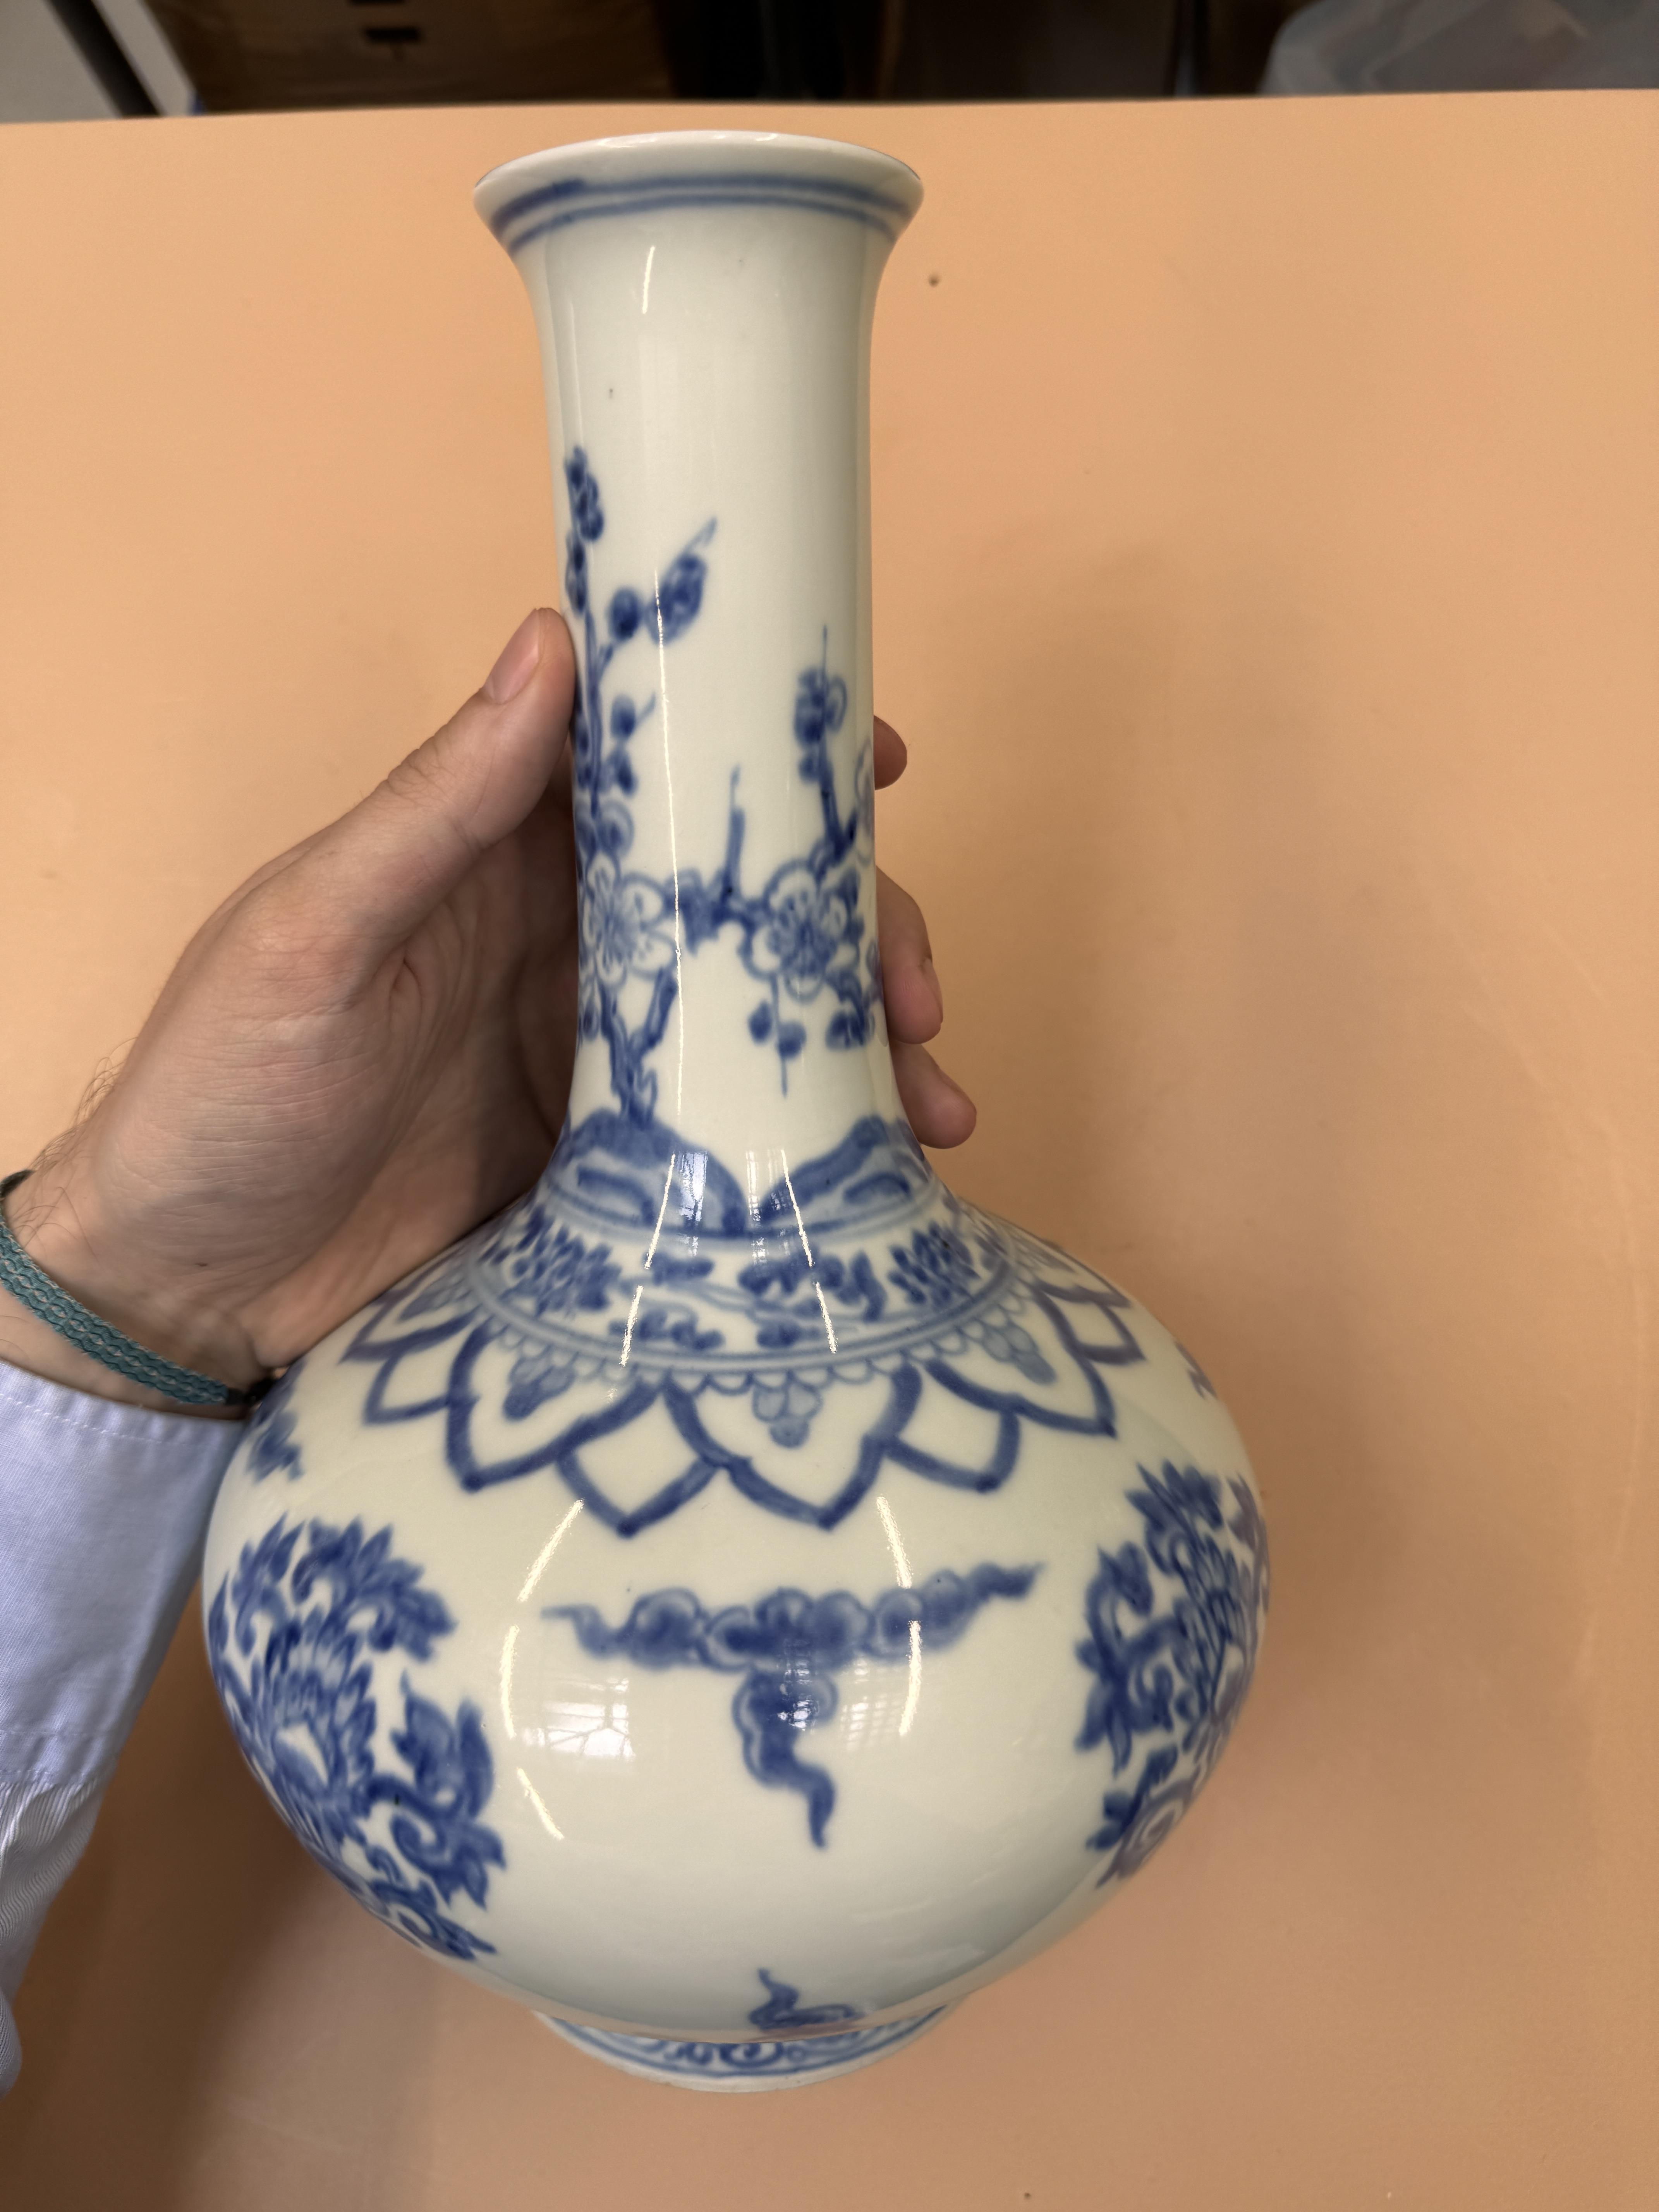 A CHINESE BLUE AND WHITE 'LOTUS' BOTTLE VASE 二十世紀 青花團蓮紋瓶 - Image 11 of 15